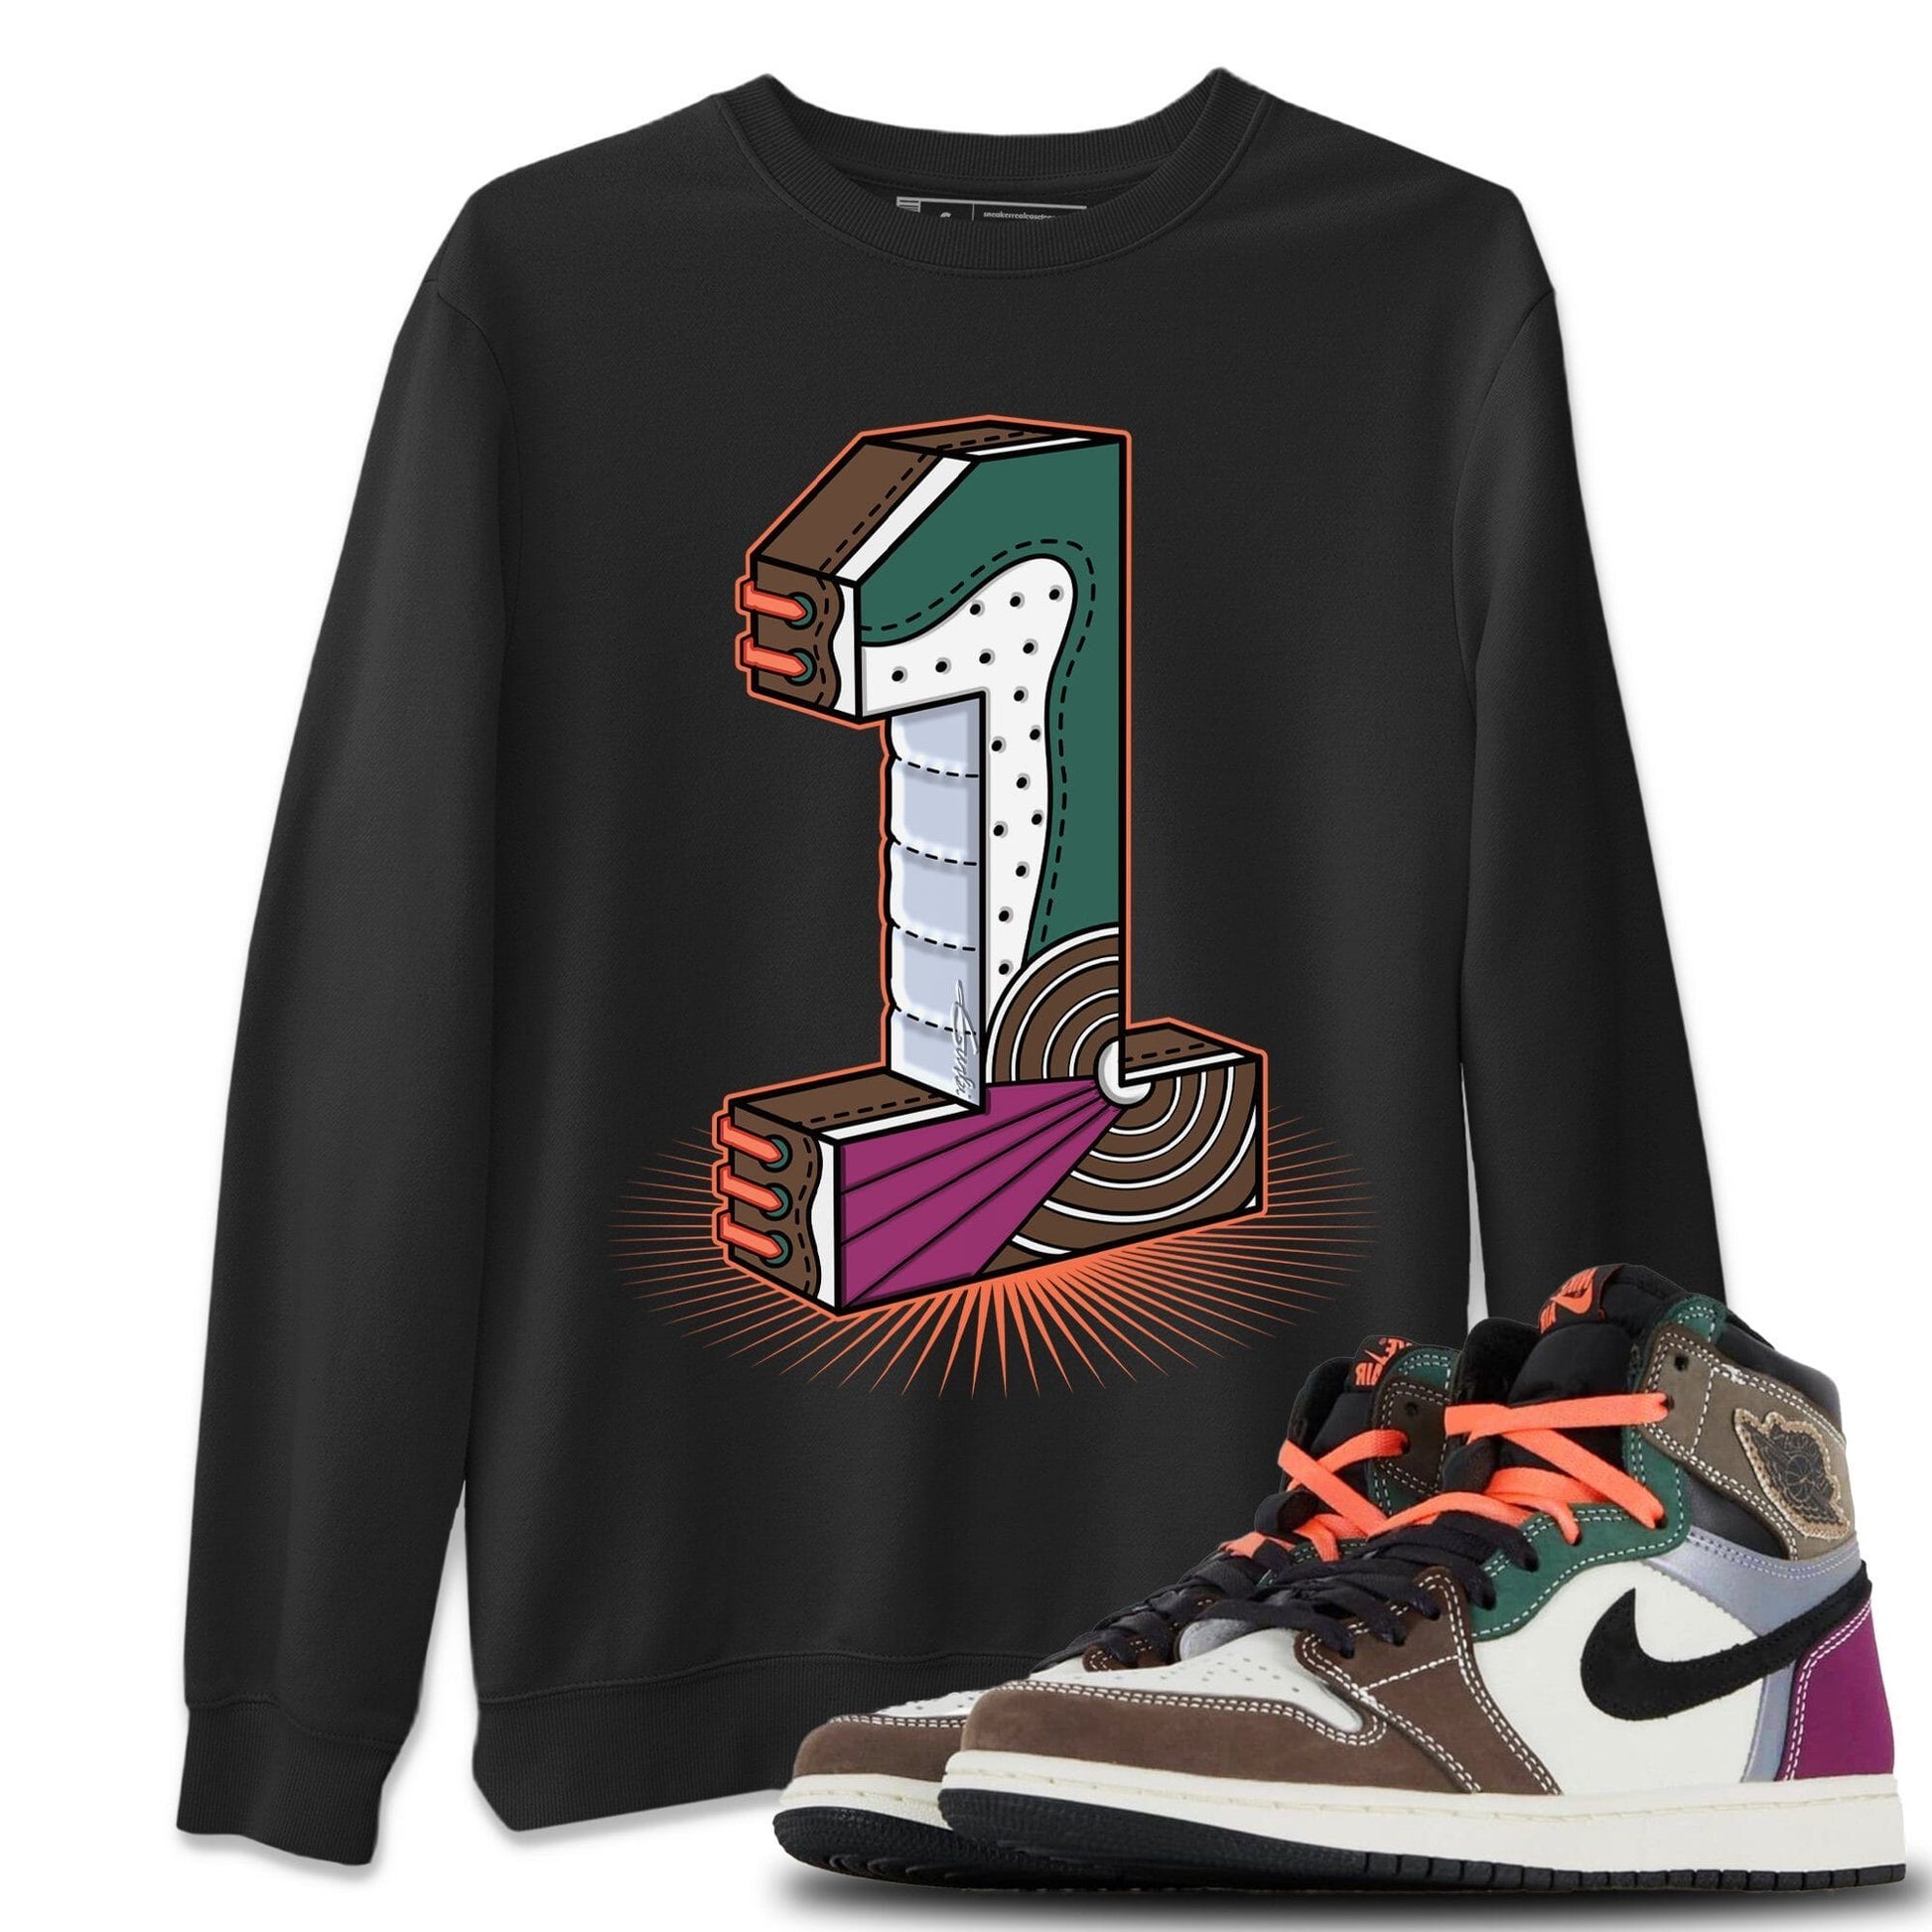 Jordan 1 Hand Crafted Sneaker Match Tees One Statue Sneaker Tees Jordan 1 Hand Crafted Sneaker Release Tees Unisex Shirts